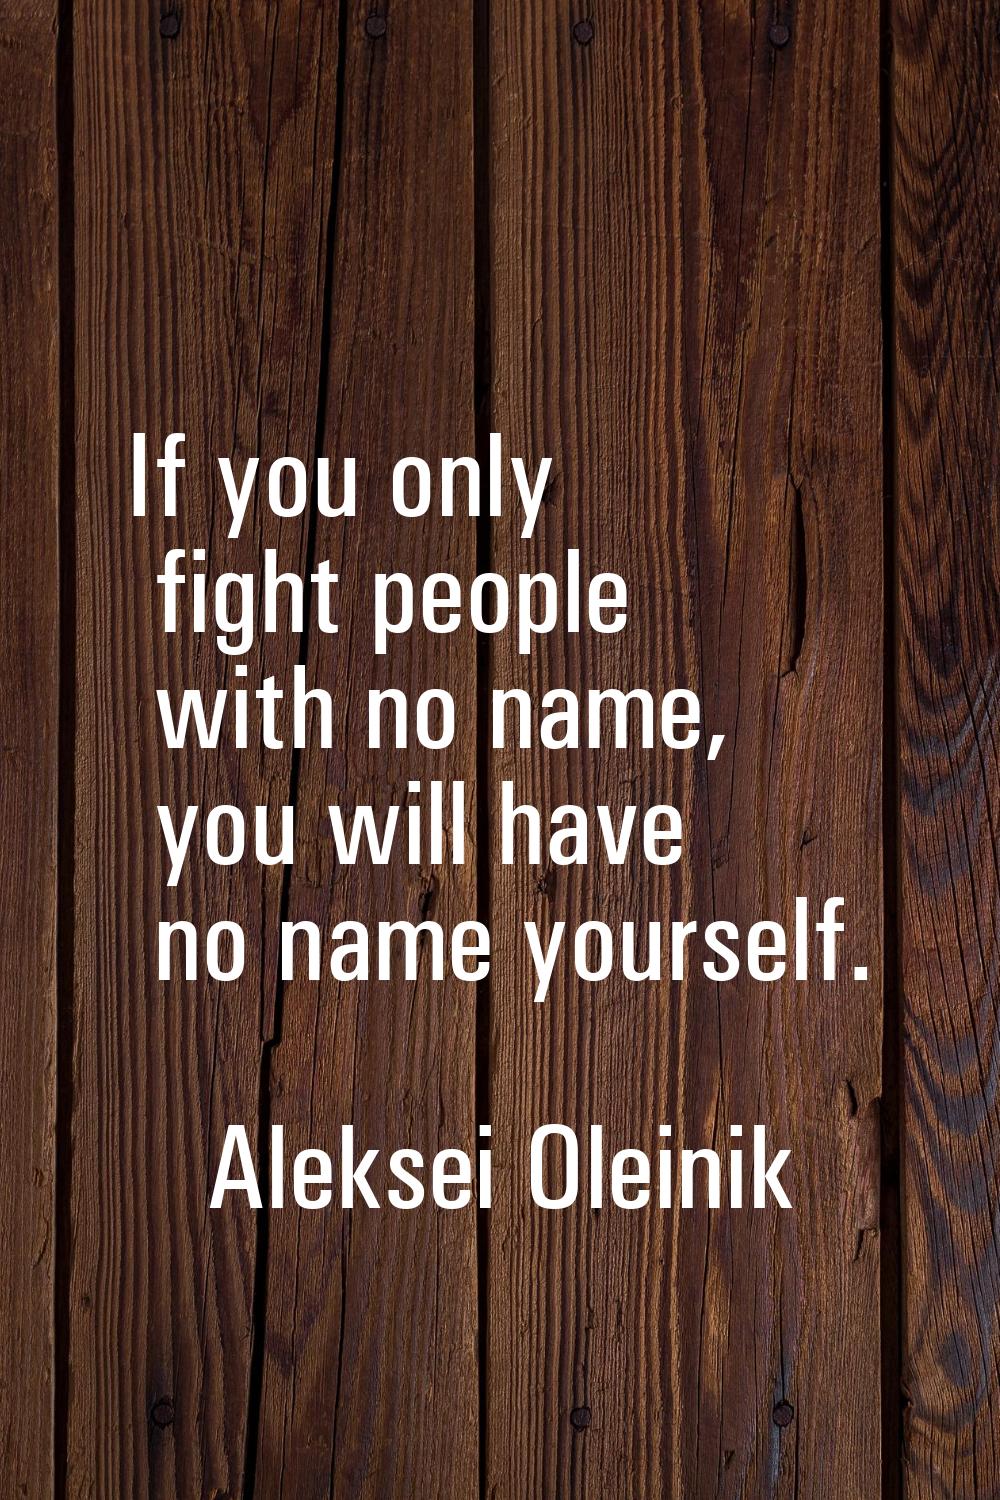 If you only fight people with no name, you will have no name yourself.